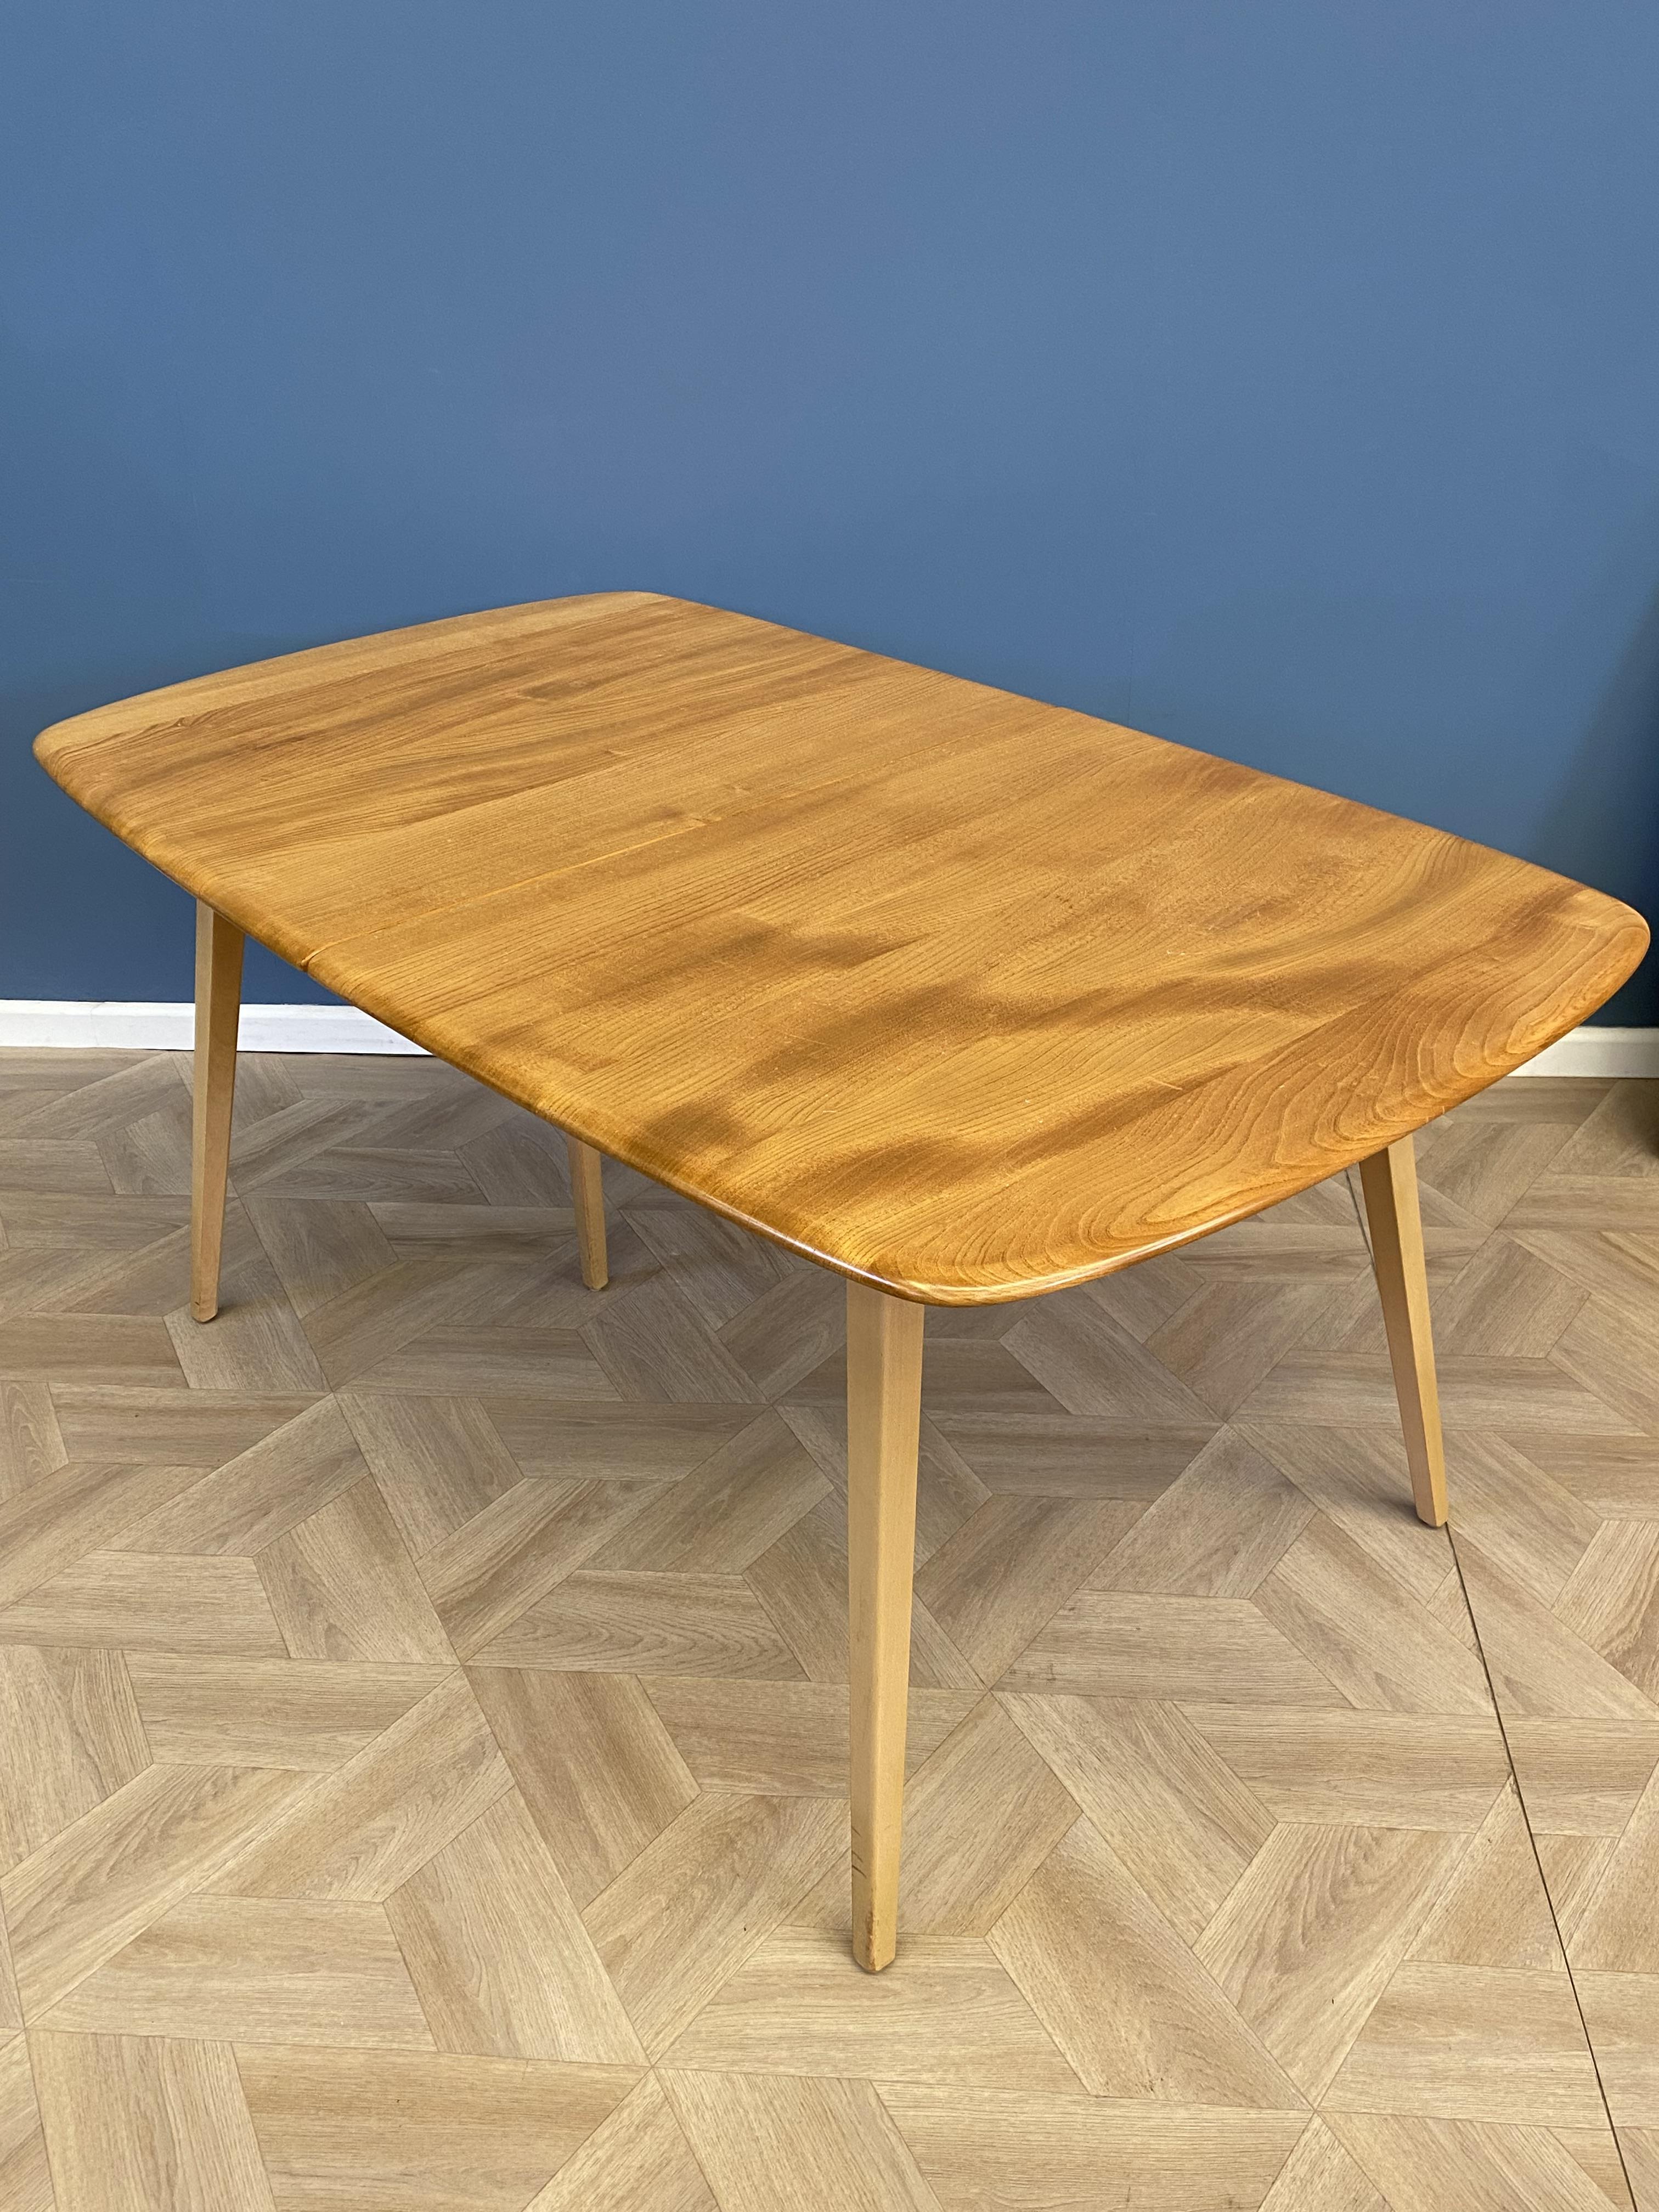 Ercol extending dining table - Image 8 of 9